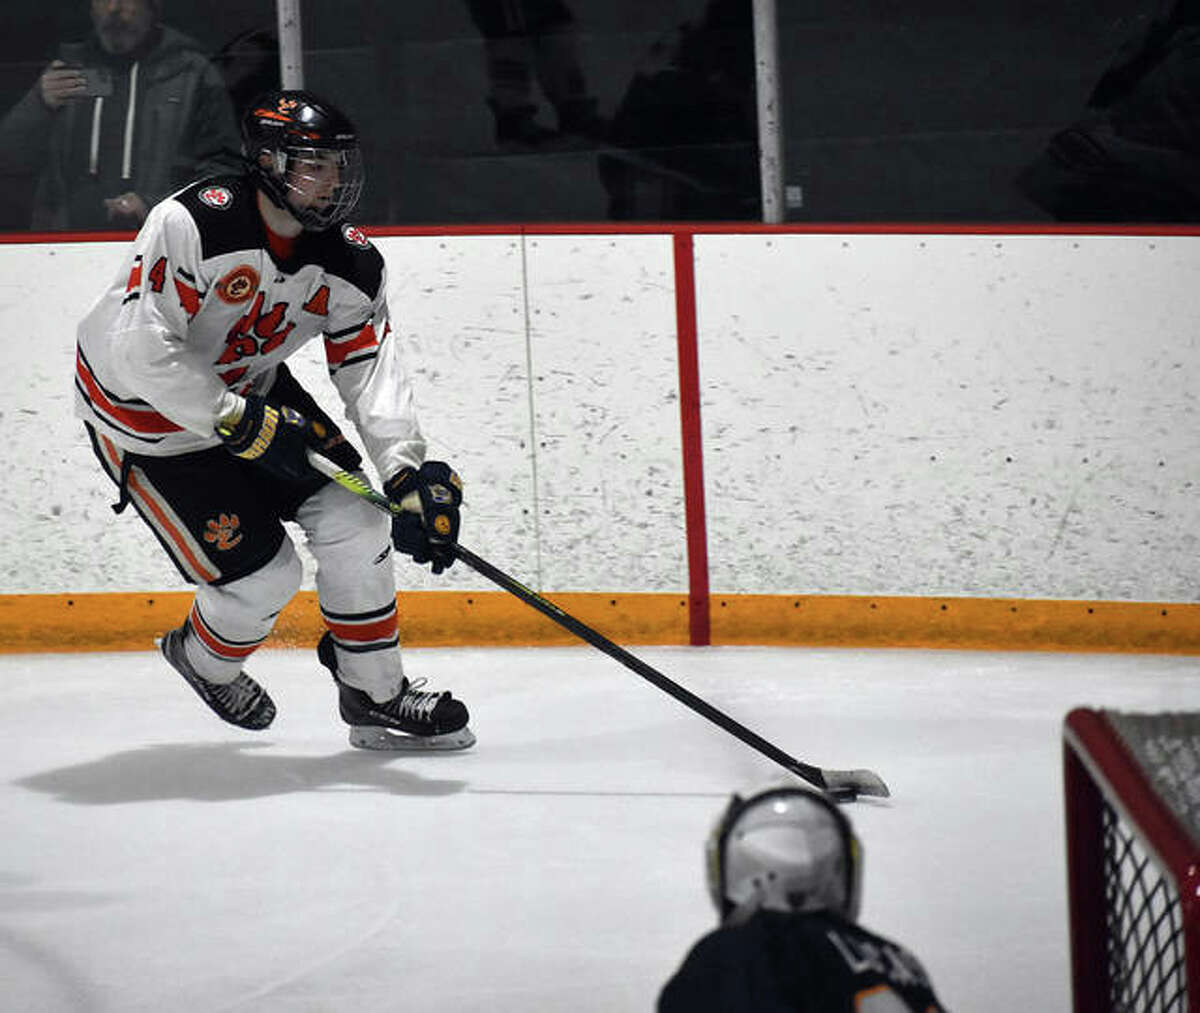 Edwardsville’s Parker Terch skates towards the goal after collecting the puck near the boards in the second period against O’Fallon inside the East Alton Ice Arena.